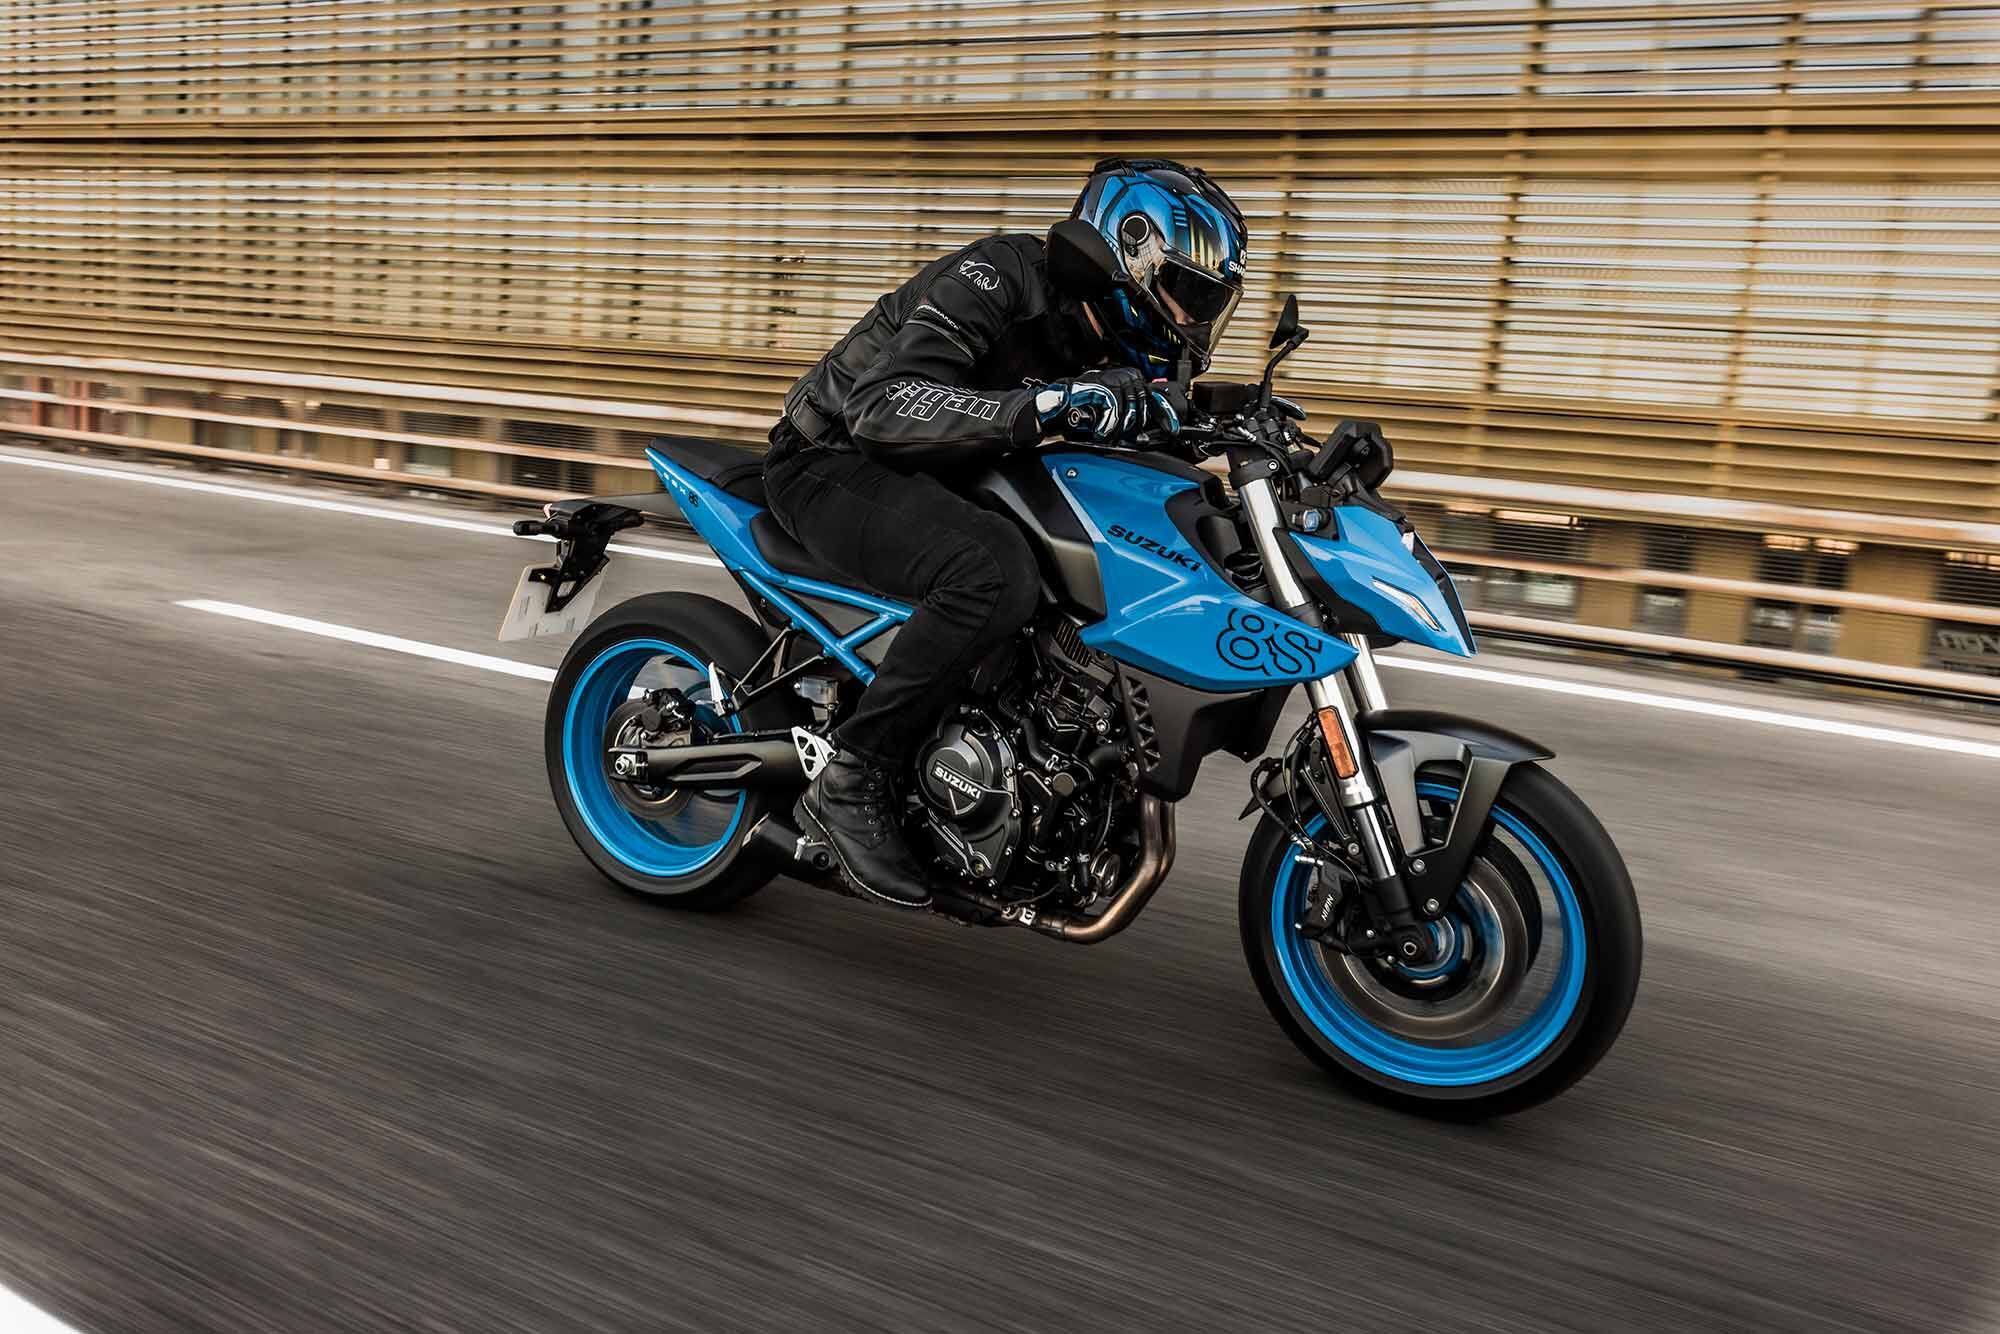 The GSX-8S has one of the boldest designs of any Suzuki released in recent years.